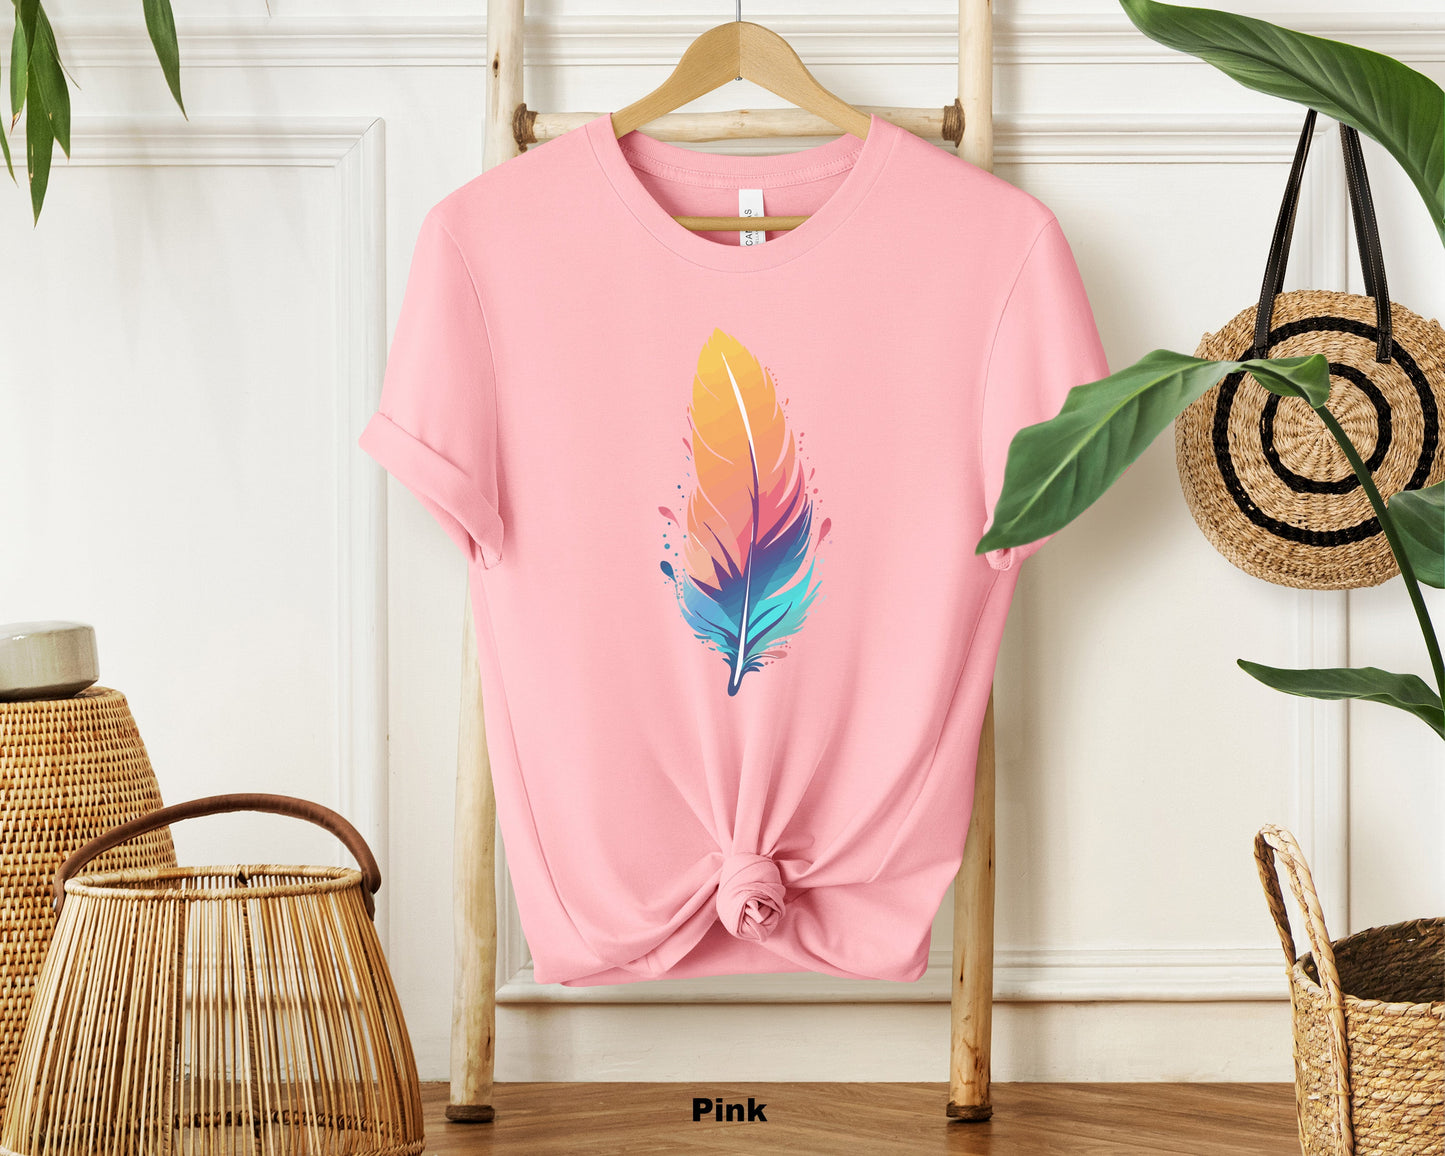 "Soft Cotton Unisex Crewneck T-Shirt with Pink Feather Print for Trendy Women"